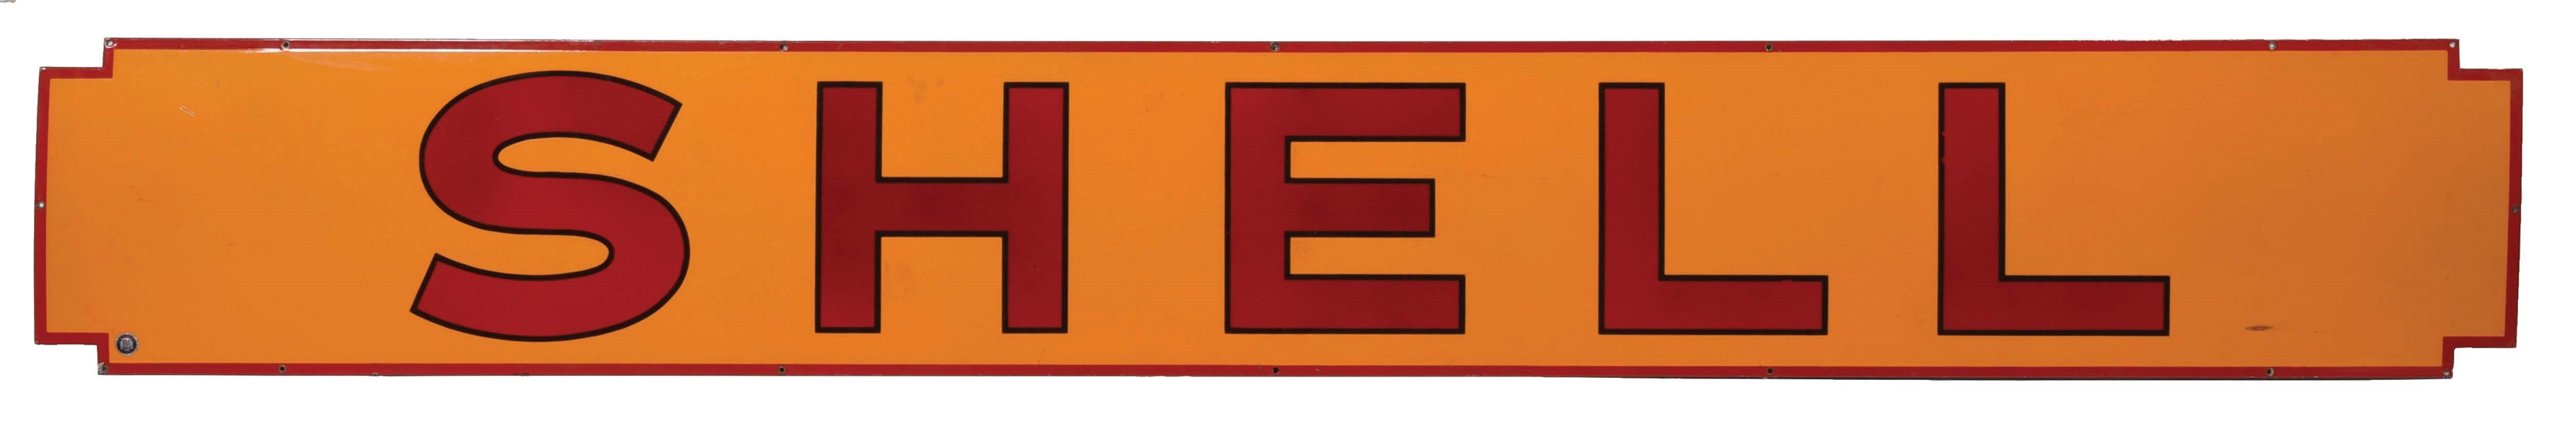 OUTSTANDING SHELL GASOLINE PORCELAIN SERVICE STATION STRIP SIGN W/ SCALLOPED EDGES. 